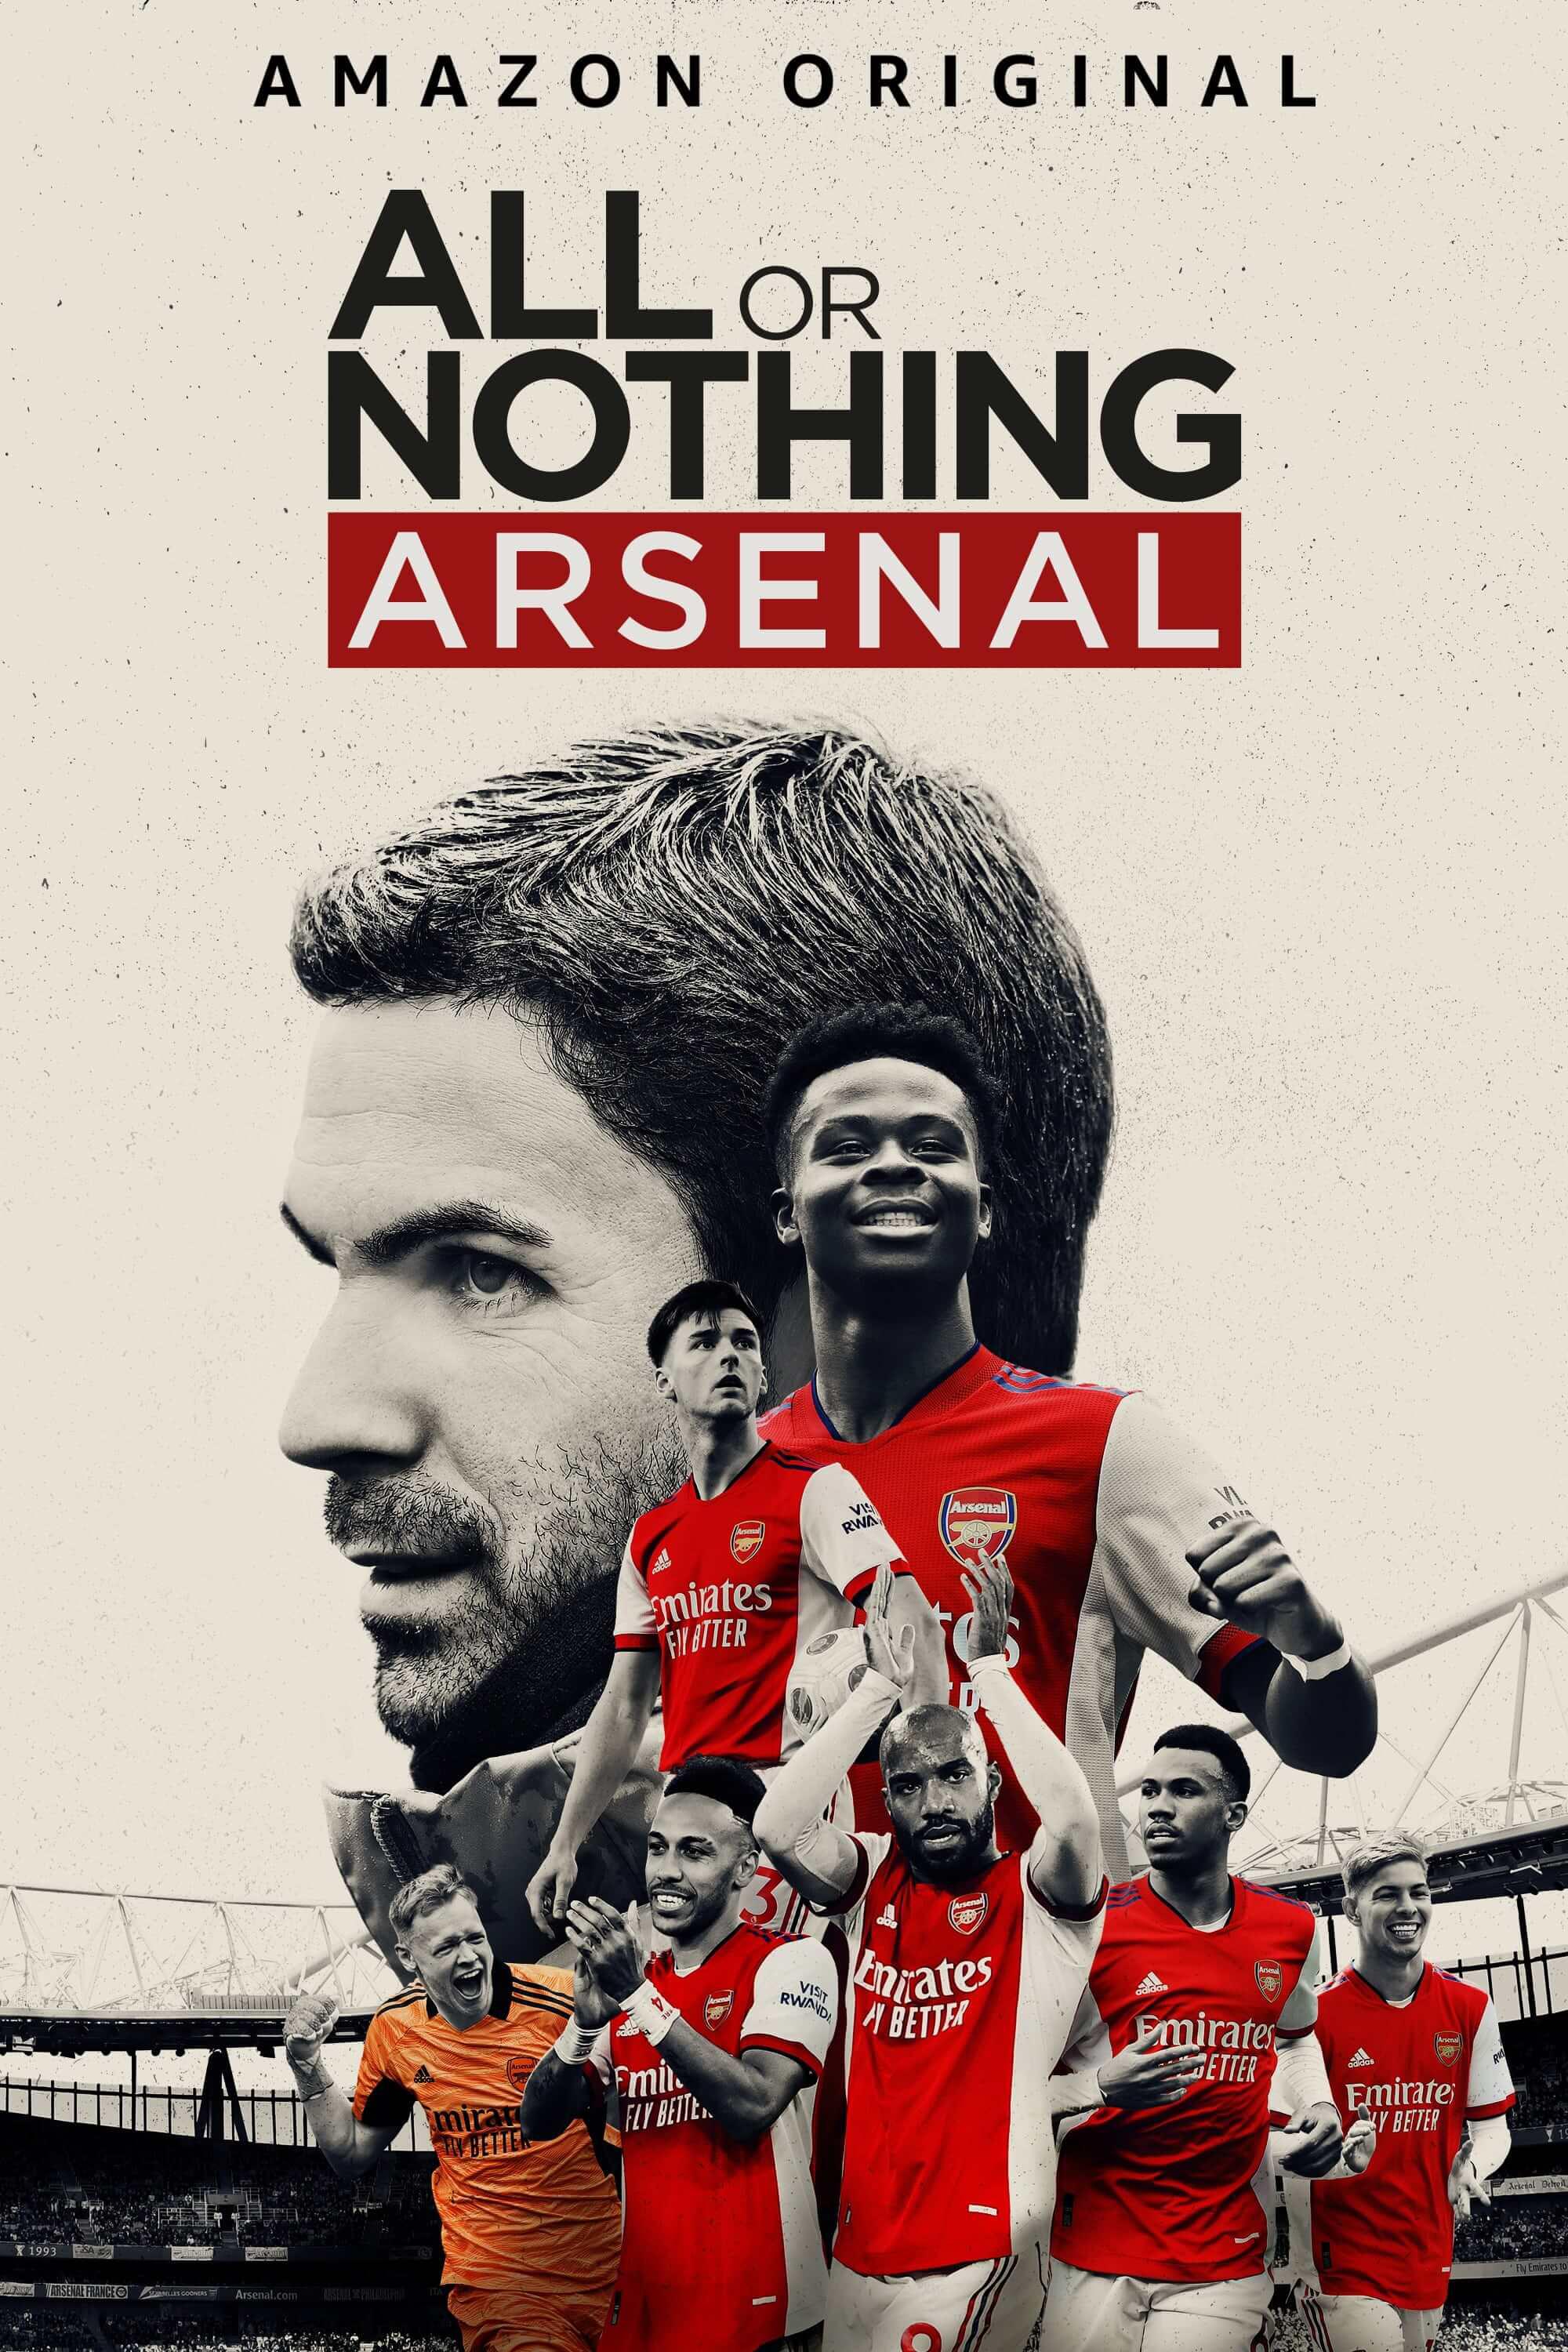 All Or Nothing Arsenal Amazon Prime Video Japan Daily Tv Audience Insights For Smarter Content Decisions Parrot Analytics